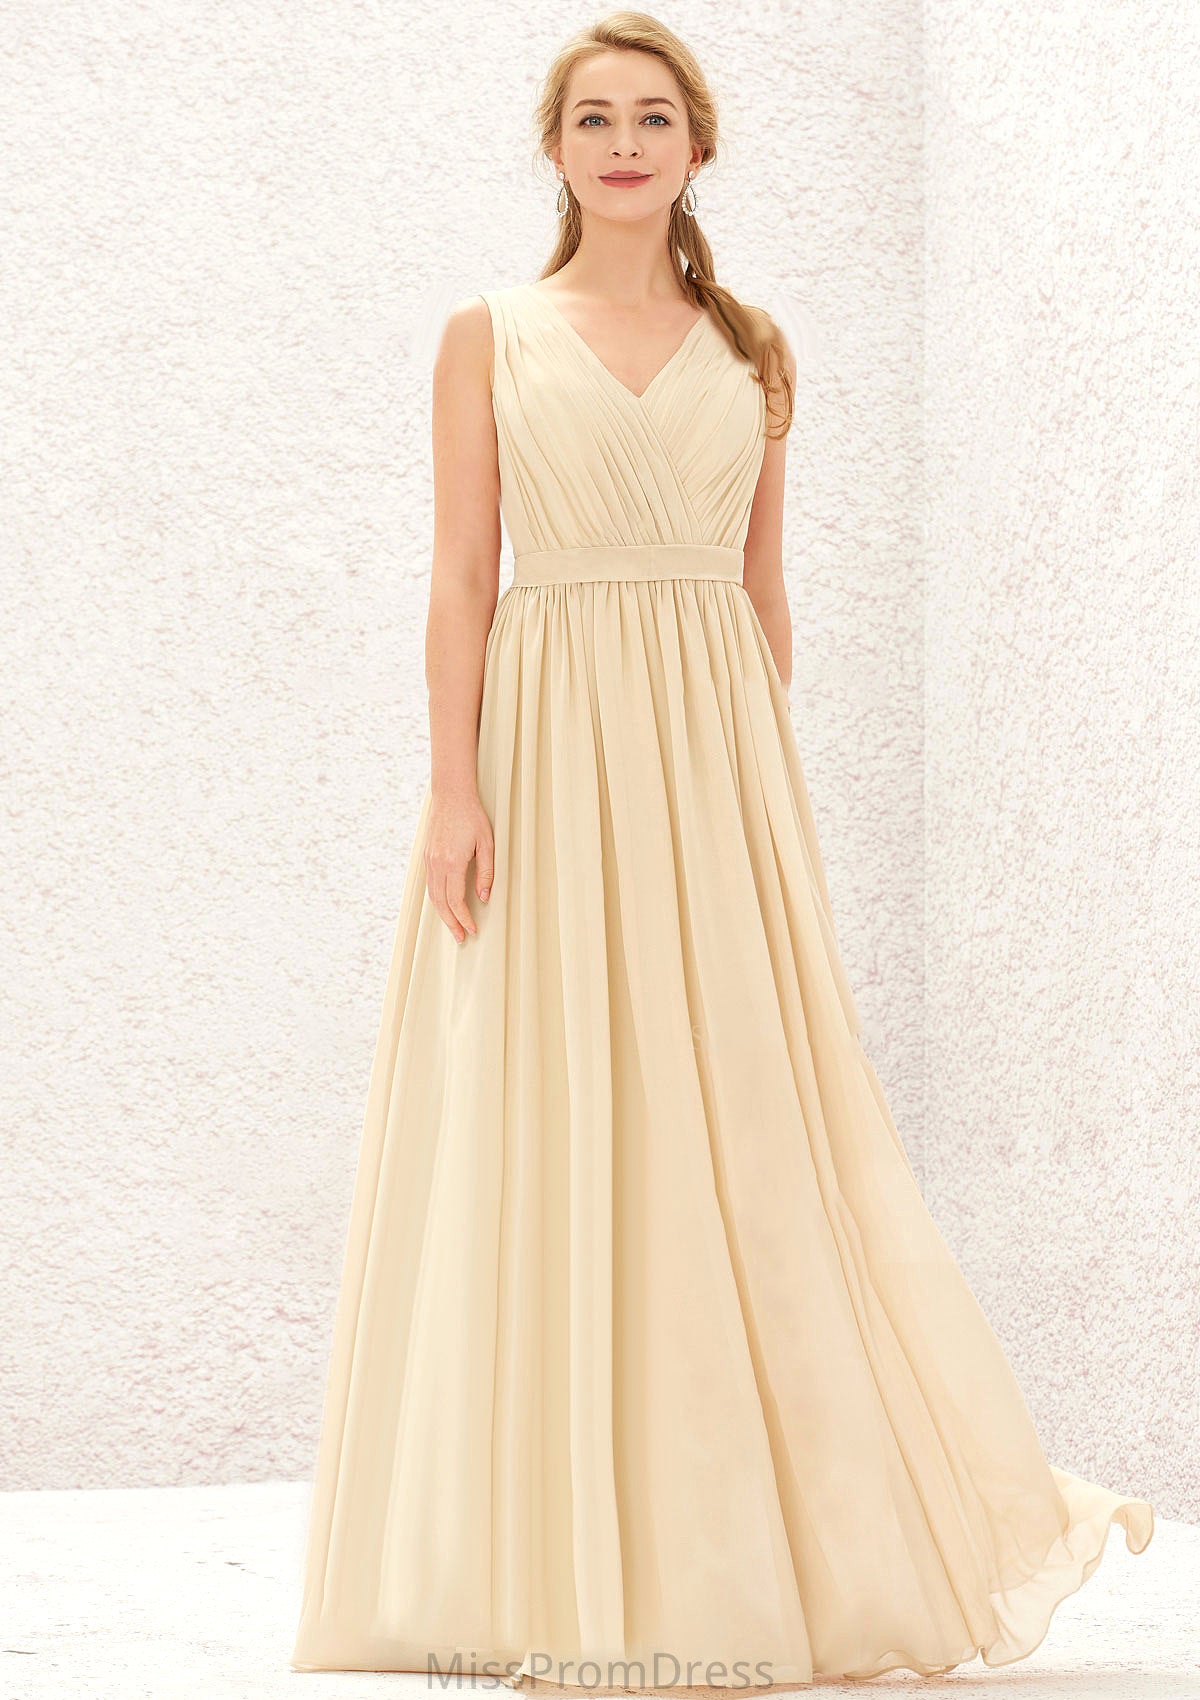 A-line V Neck Sleeveless Chiffon Long/Floor-Length Bridesmaid Dresses With Appliqued Sashes Pleated Emmy HMP0025630